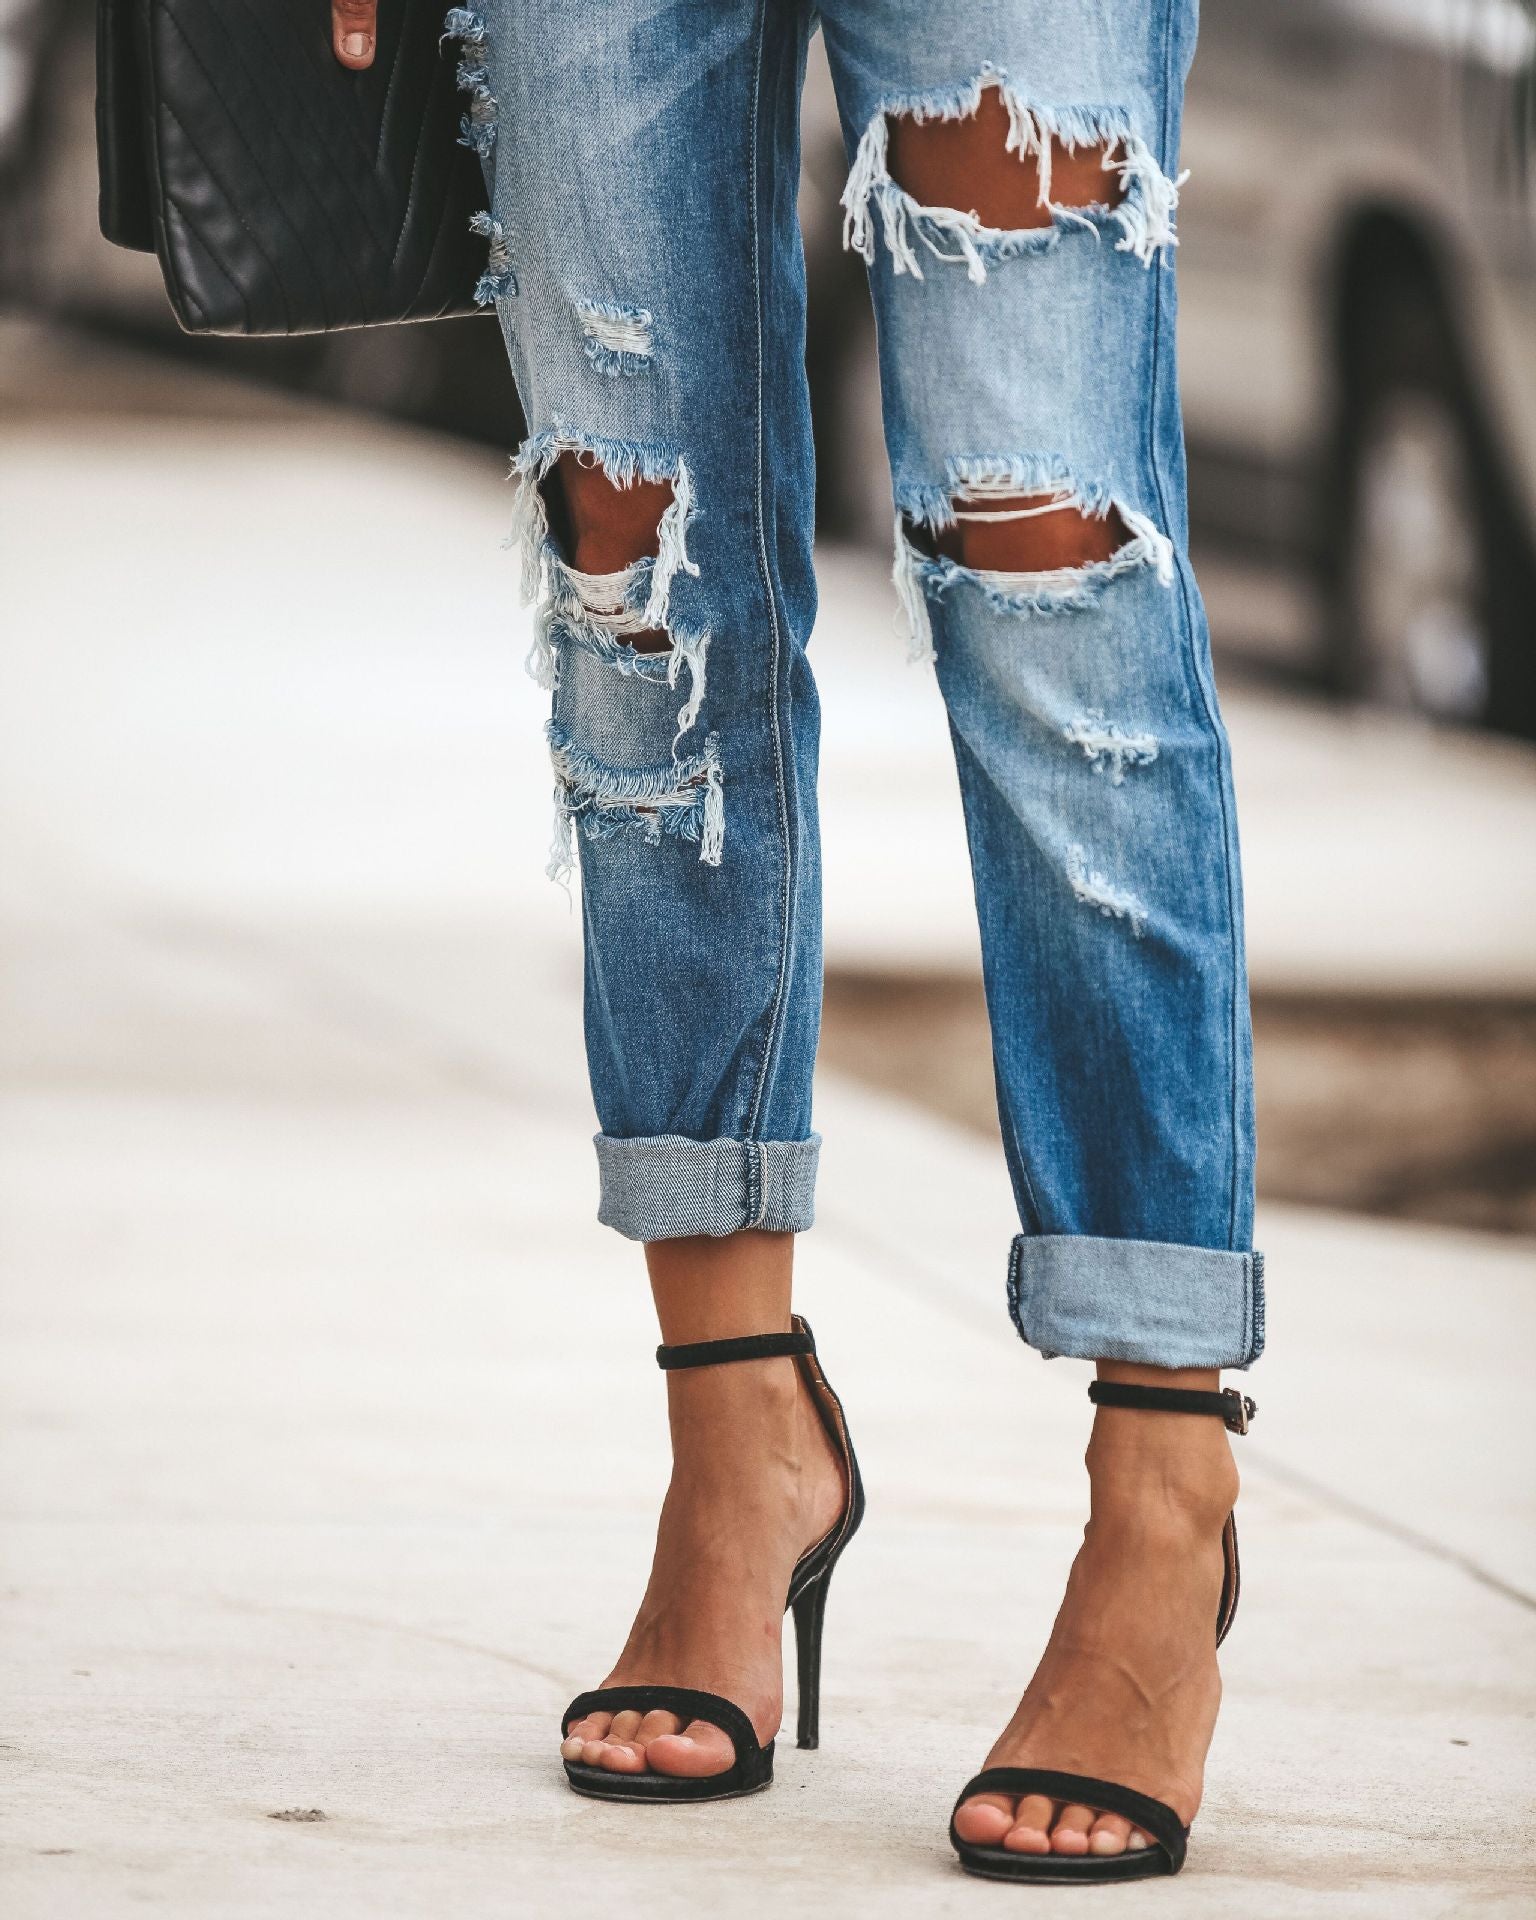 Large ripped jeans